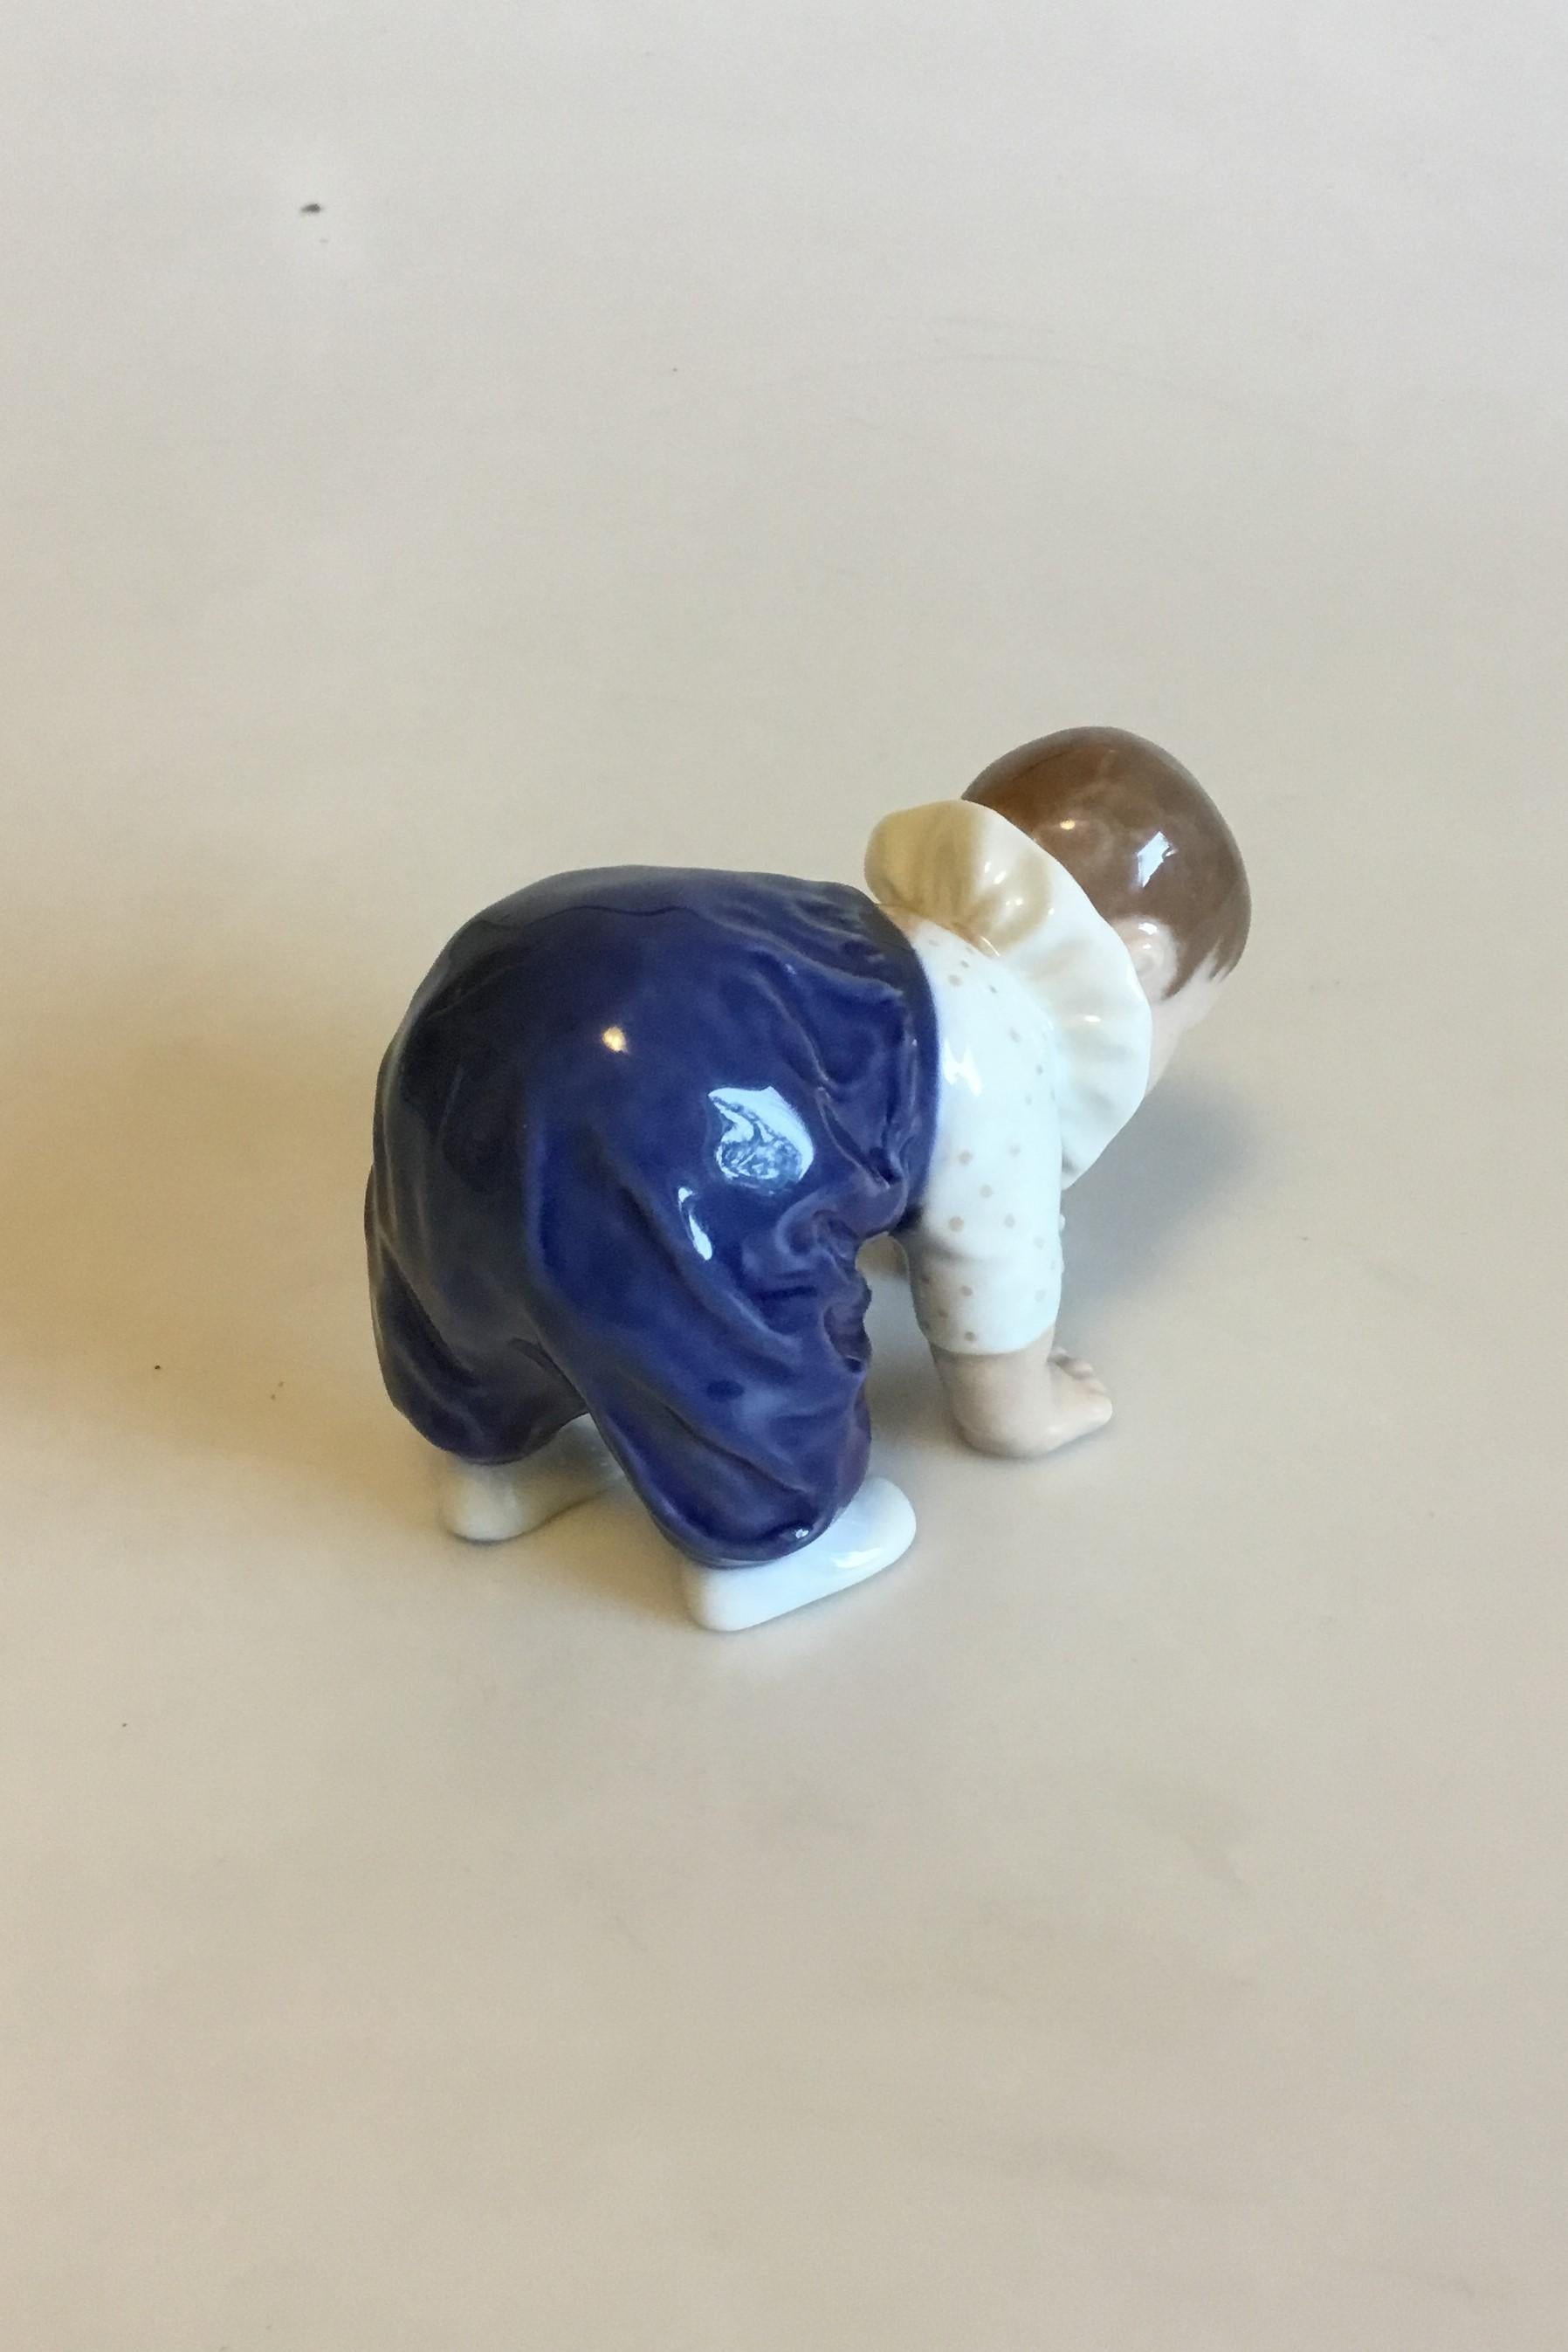 Royal Copenhagen figurine crawling child no 1518. Measures 7 cm / 2 3/4 in. And is in good condition. Designed by Else Sandholt.